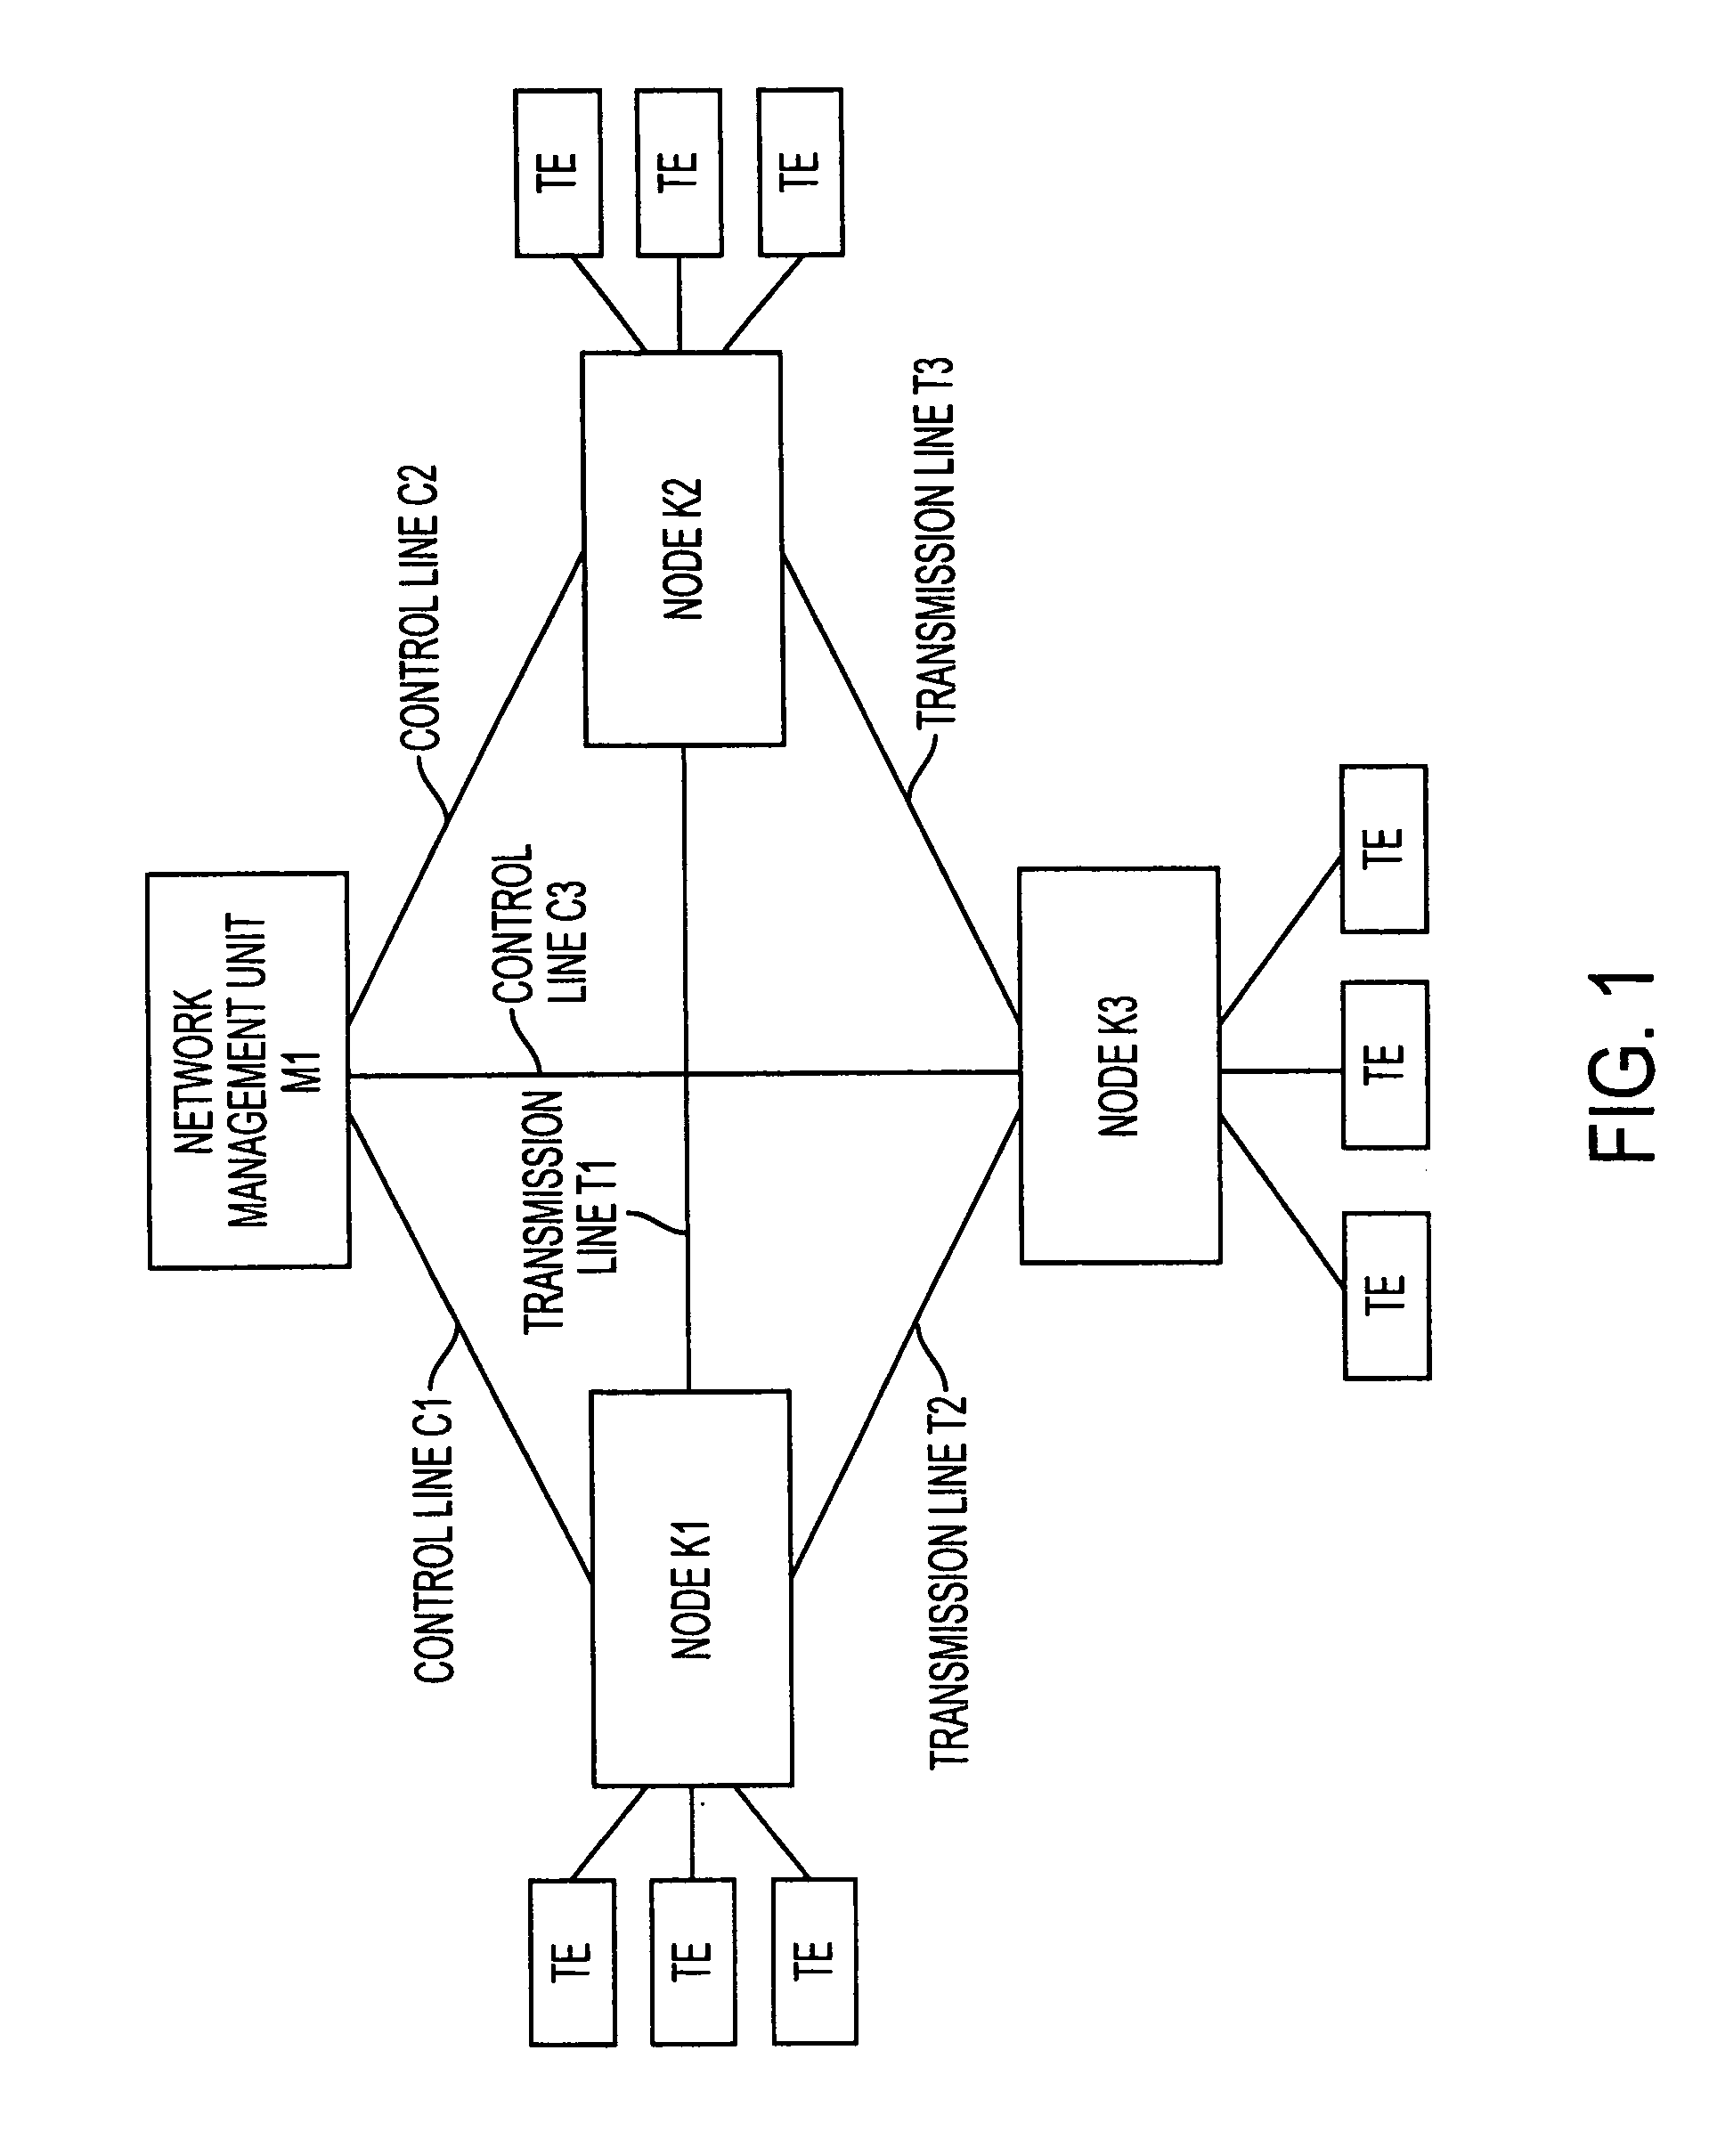 Network management method and communications network system